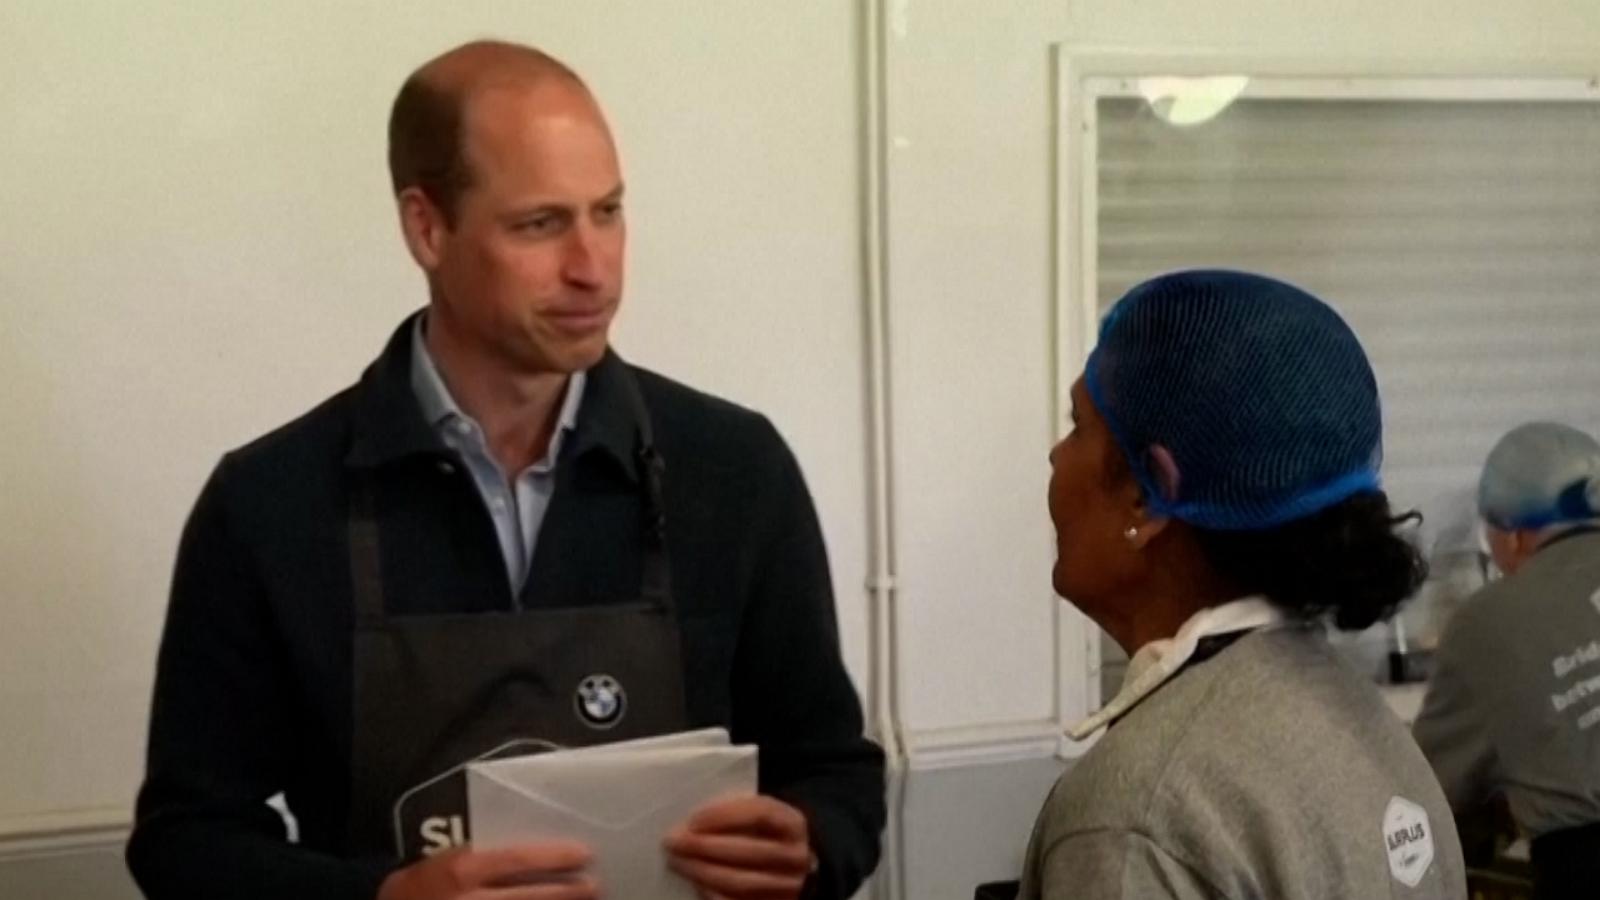 VIDEO: Prince William returns to work after Kate Middleton's cancer announcement